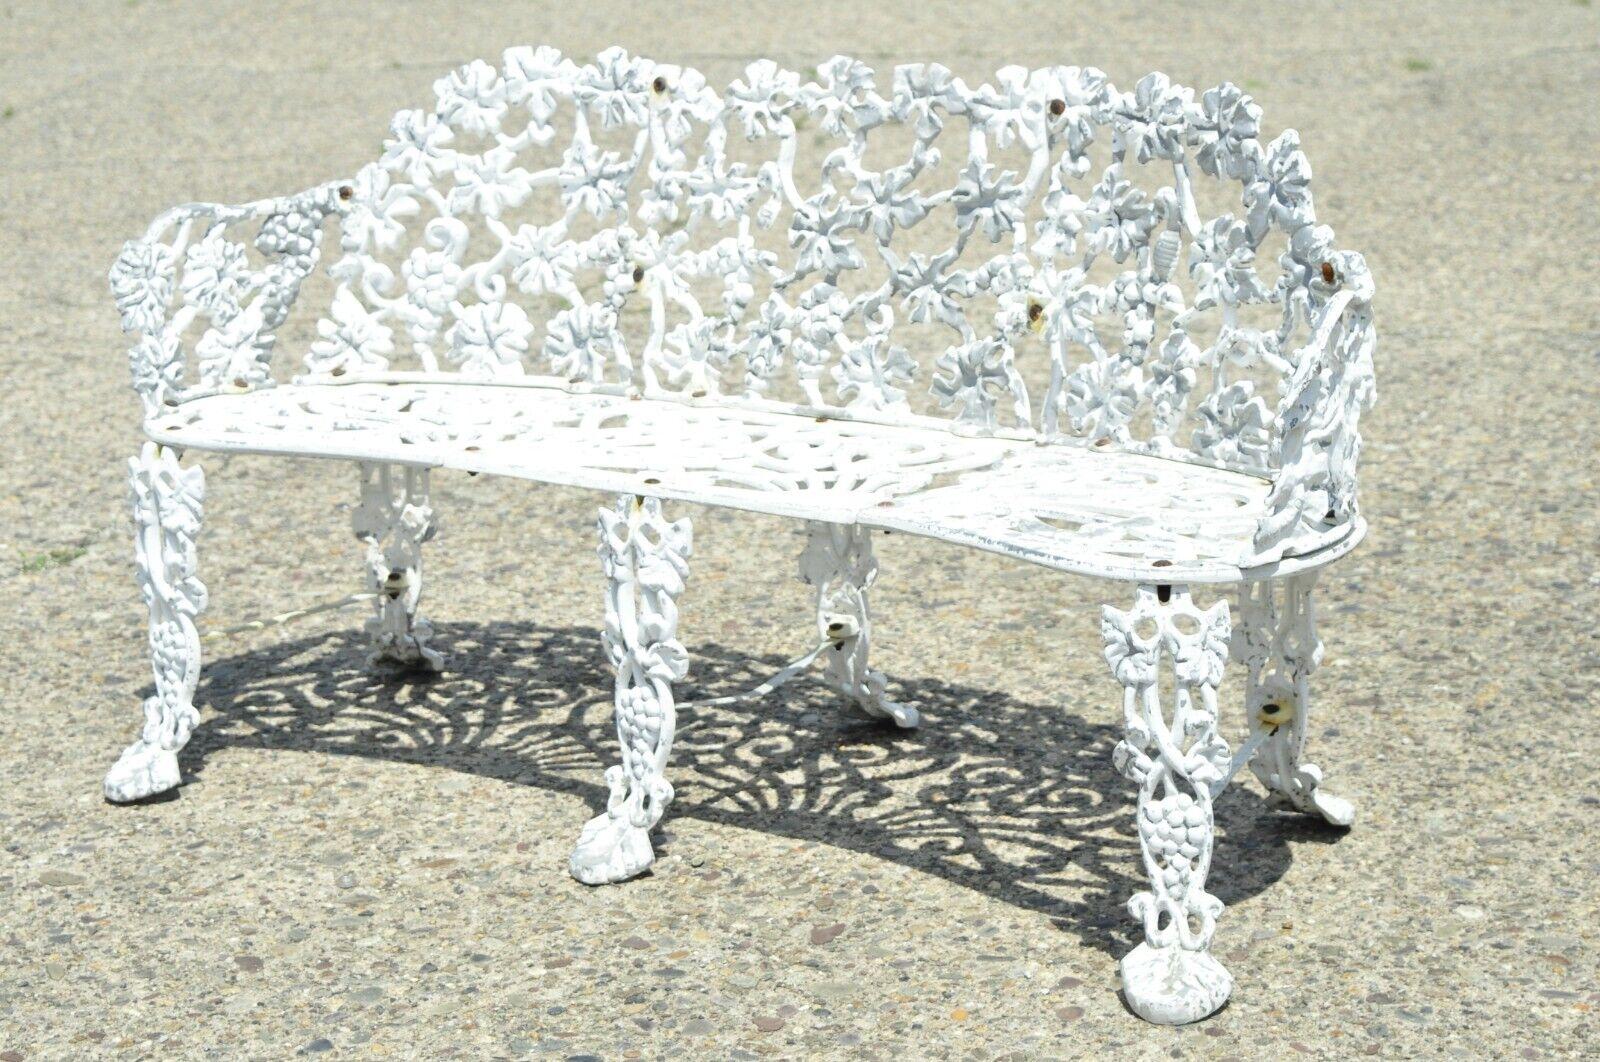 Vintage cast aluminum grape and leaf vine outdoor garden loveseat bench settee. Item features cast aluminum construction, grape vine pattern, pierced scroll work seat, very nice vintage item, great style and form. Circa mid 20th century.